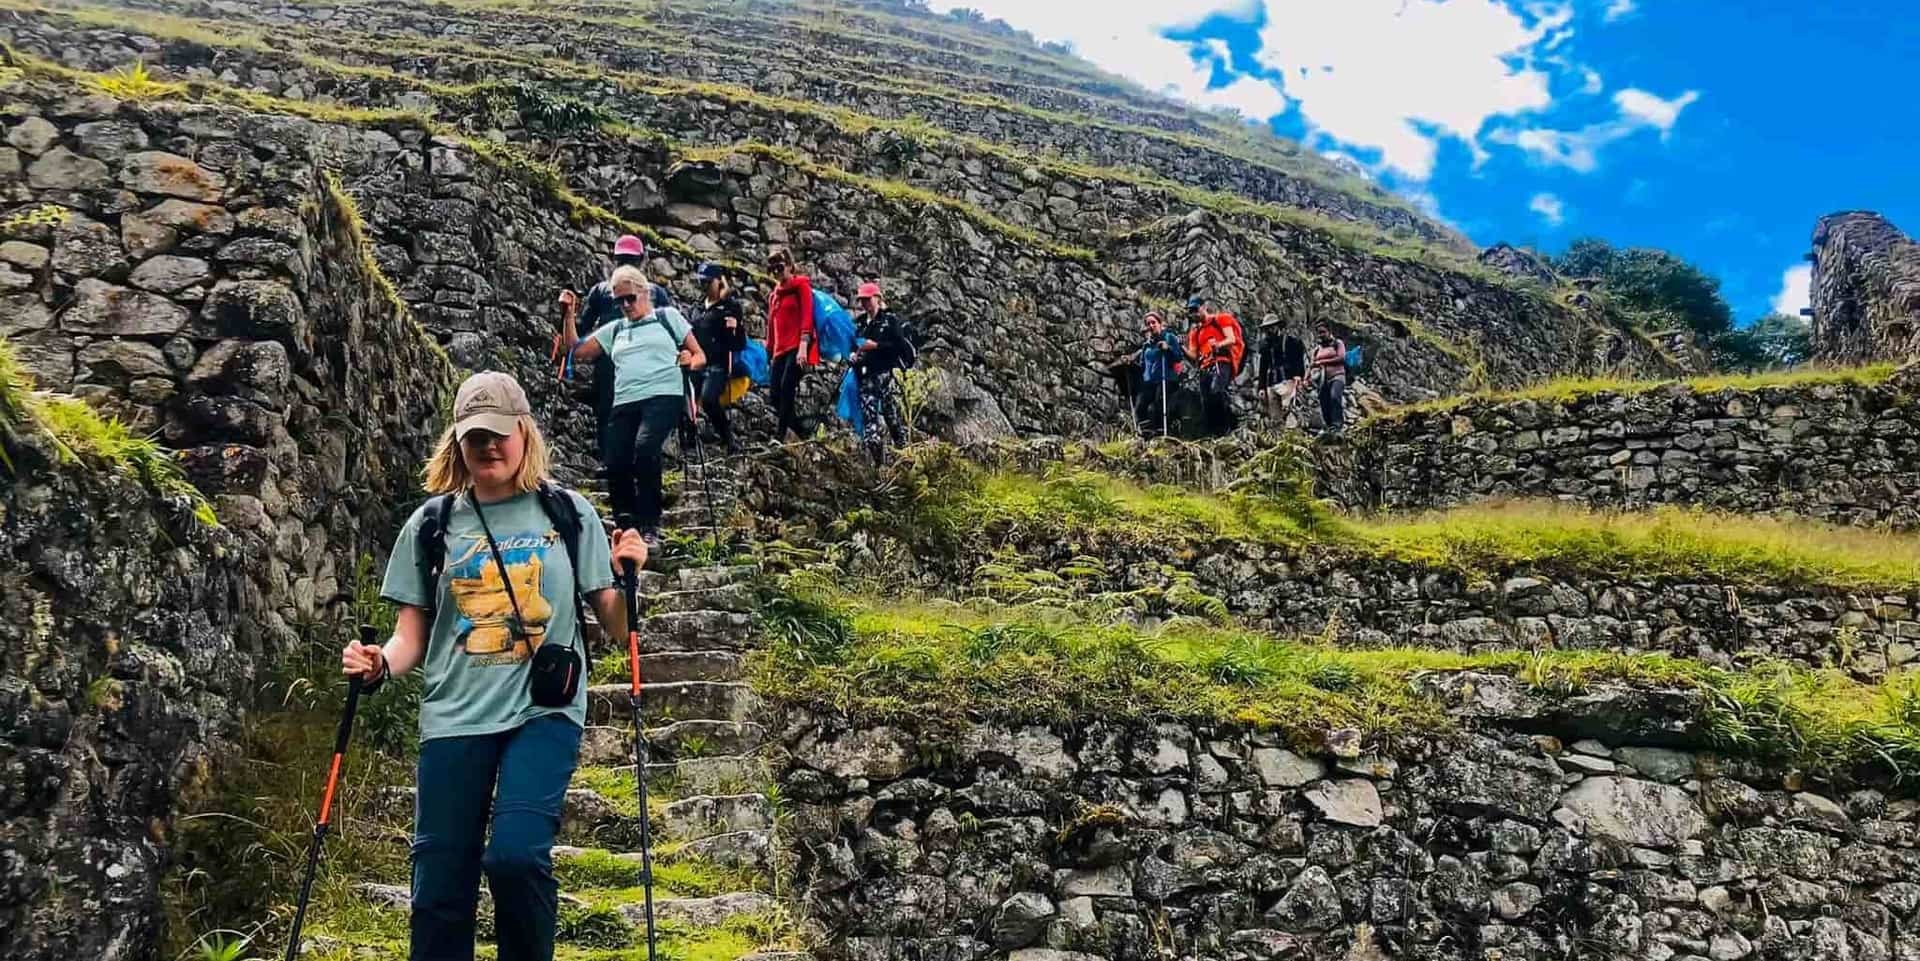 Inca trail 2023, verify the real-time availability of Inca Trail permits. Plan ahead for your hike along the Inca Trail. The Machu Picchu hike has a finite number of openings.